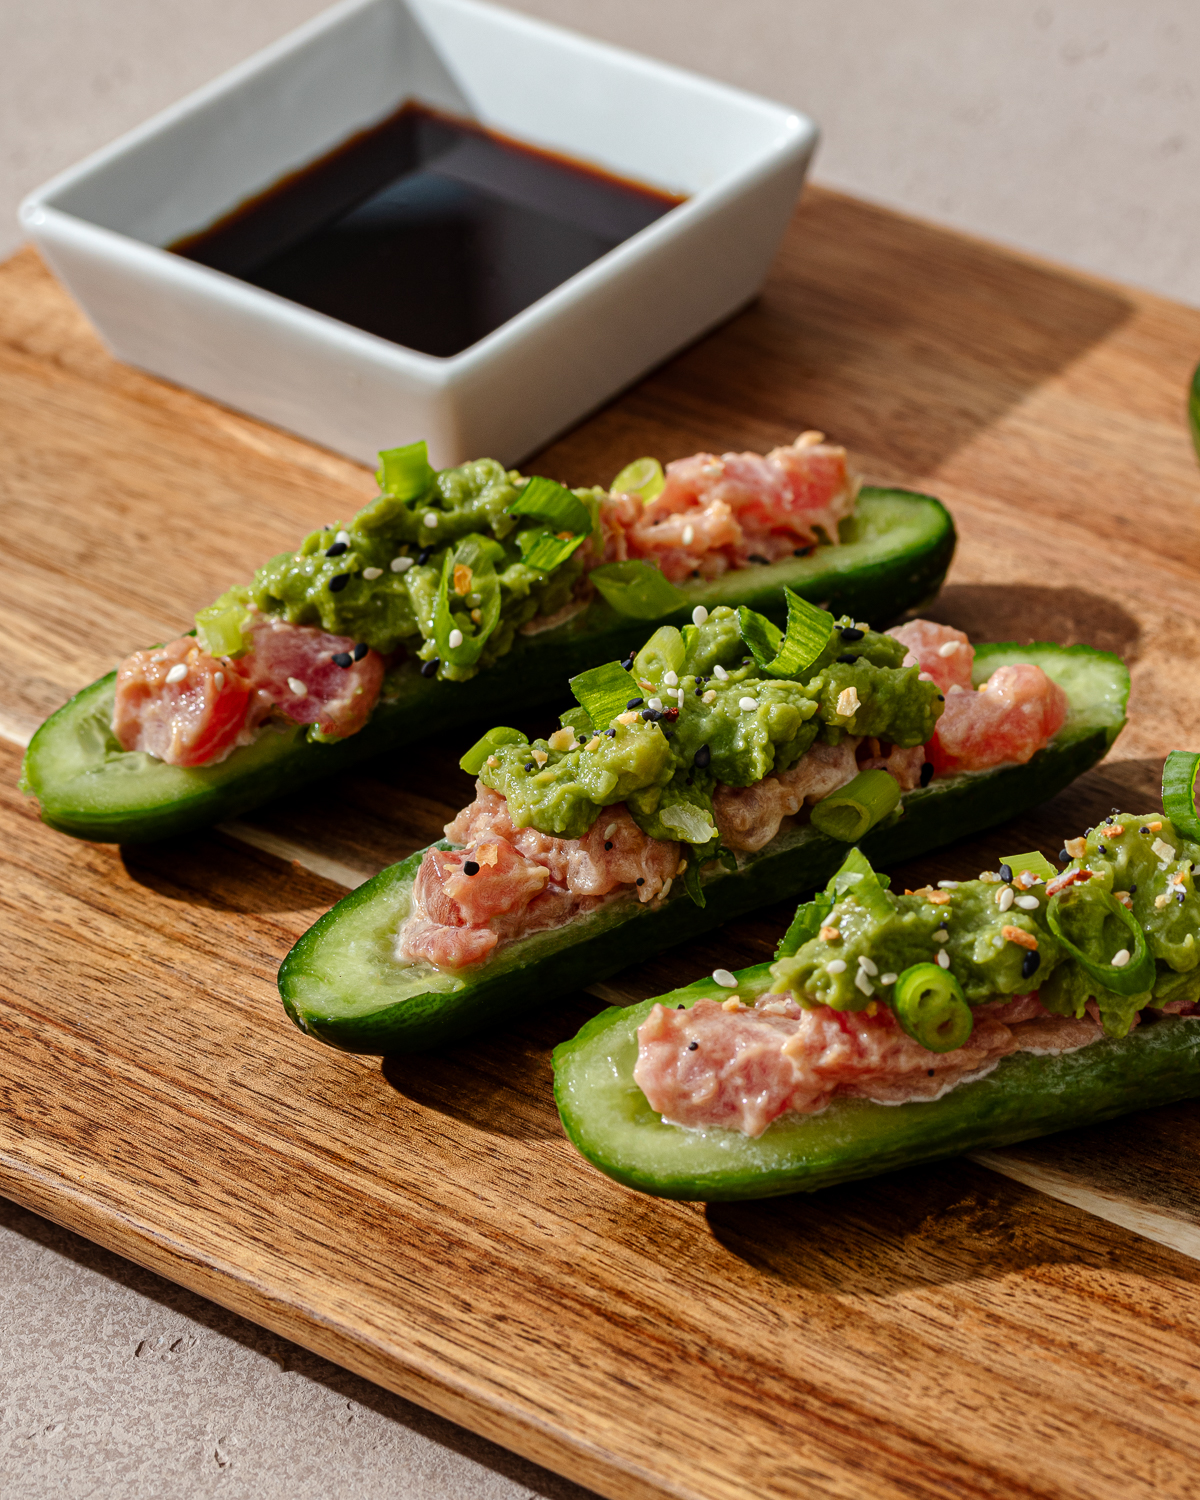 Cucumber sushi boats with sauce and toppings on a wooden cutting board.